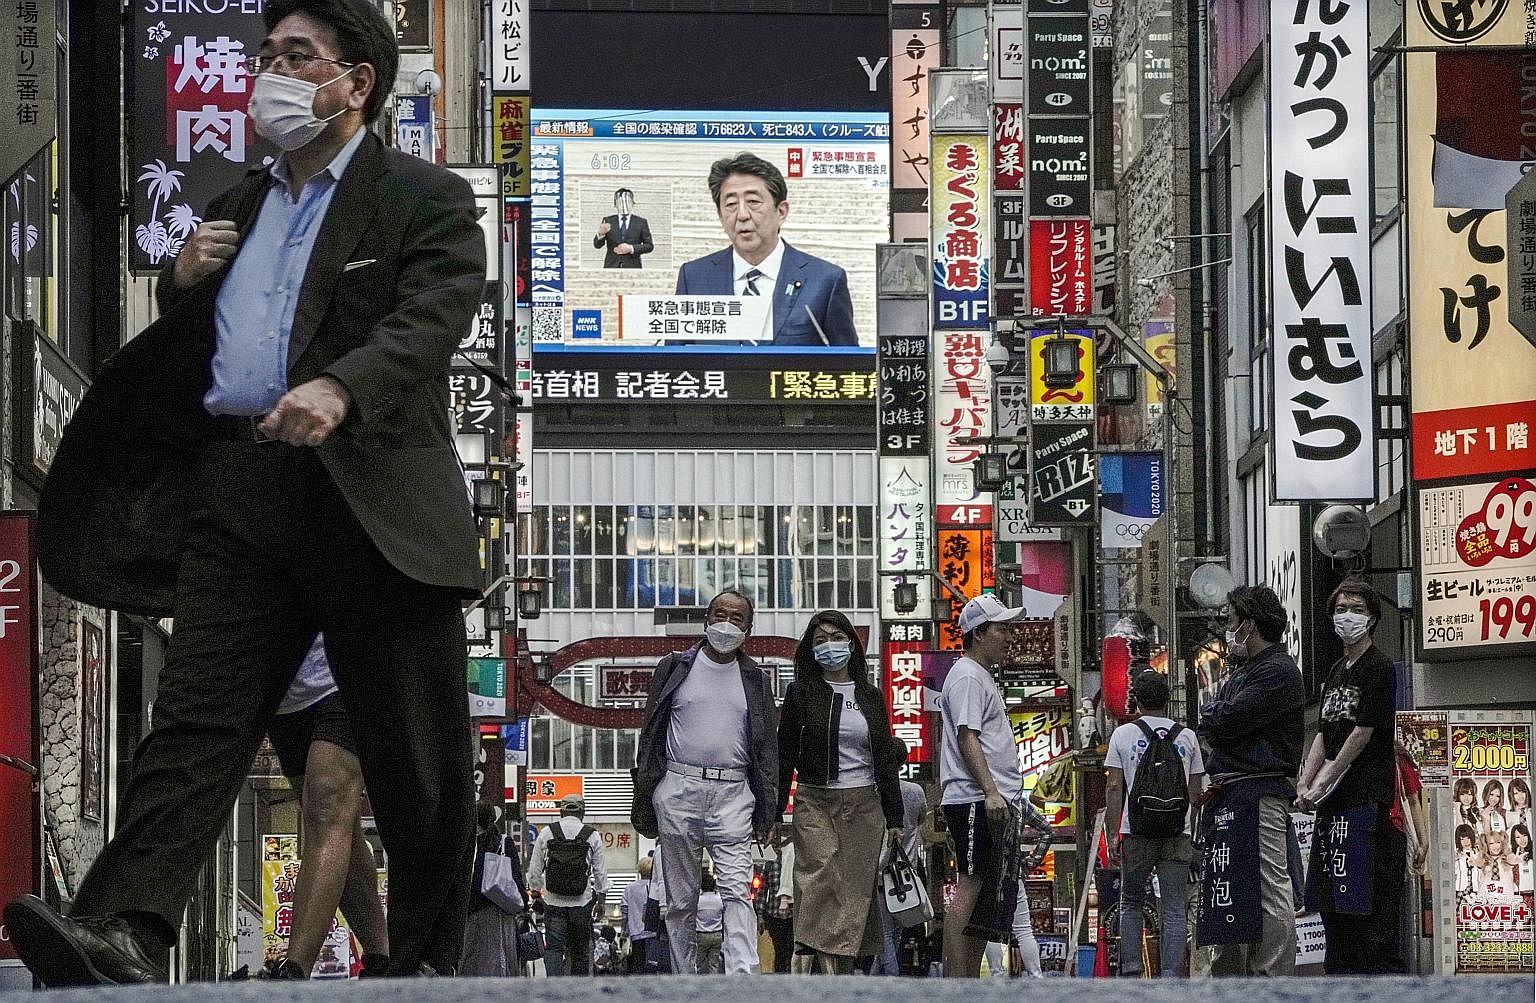 Japanese Prime Minister Shinzo Abe announced the end of a nationwide state of emergency in a live TV broadcast yesterday - seen here in Tokyo's Shinjuku area - as the number of coronavirus cases tailed off. He also announced plans for a second aid pa